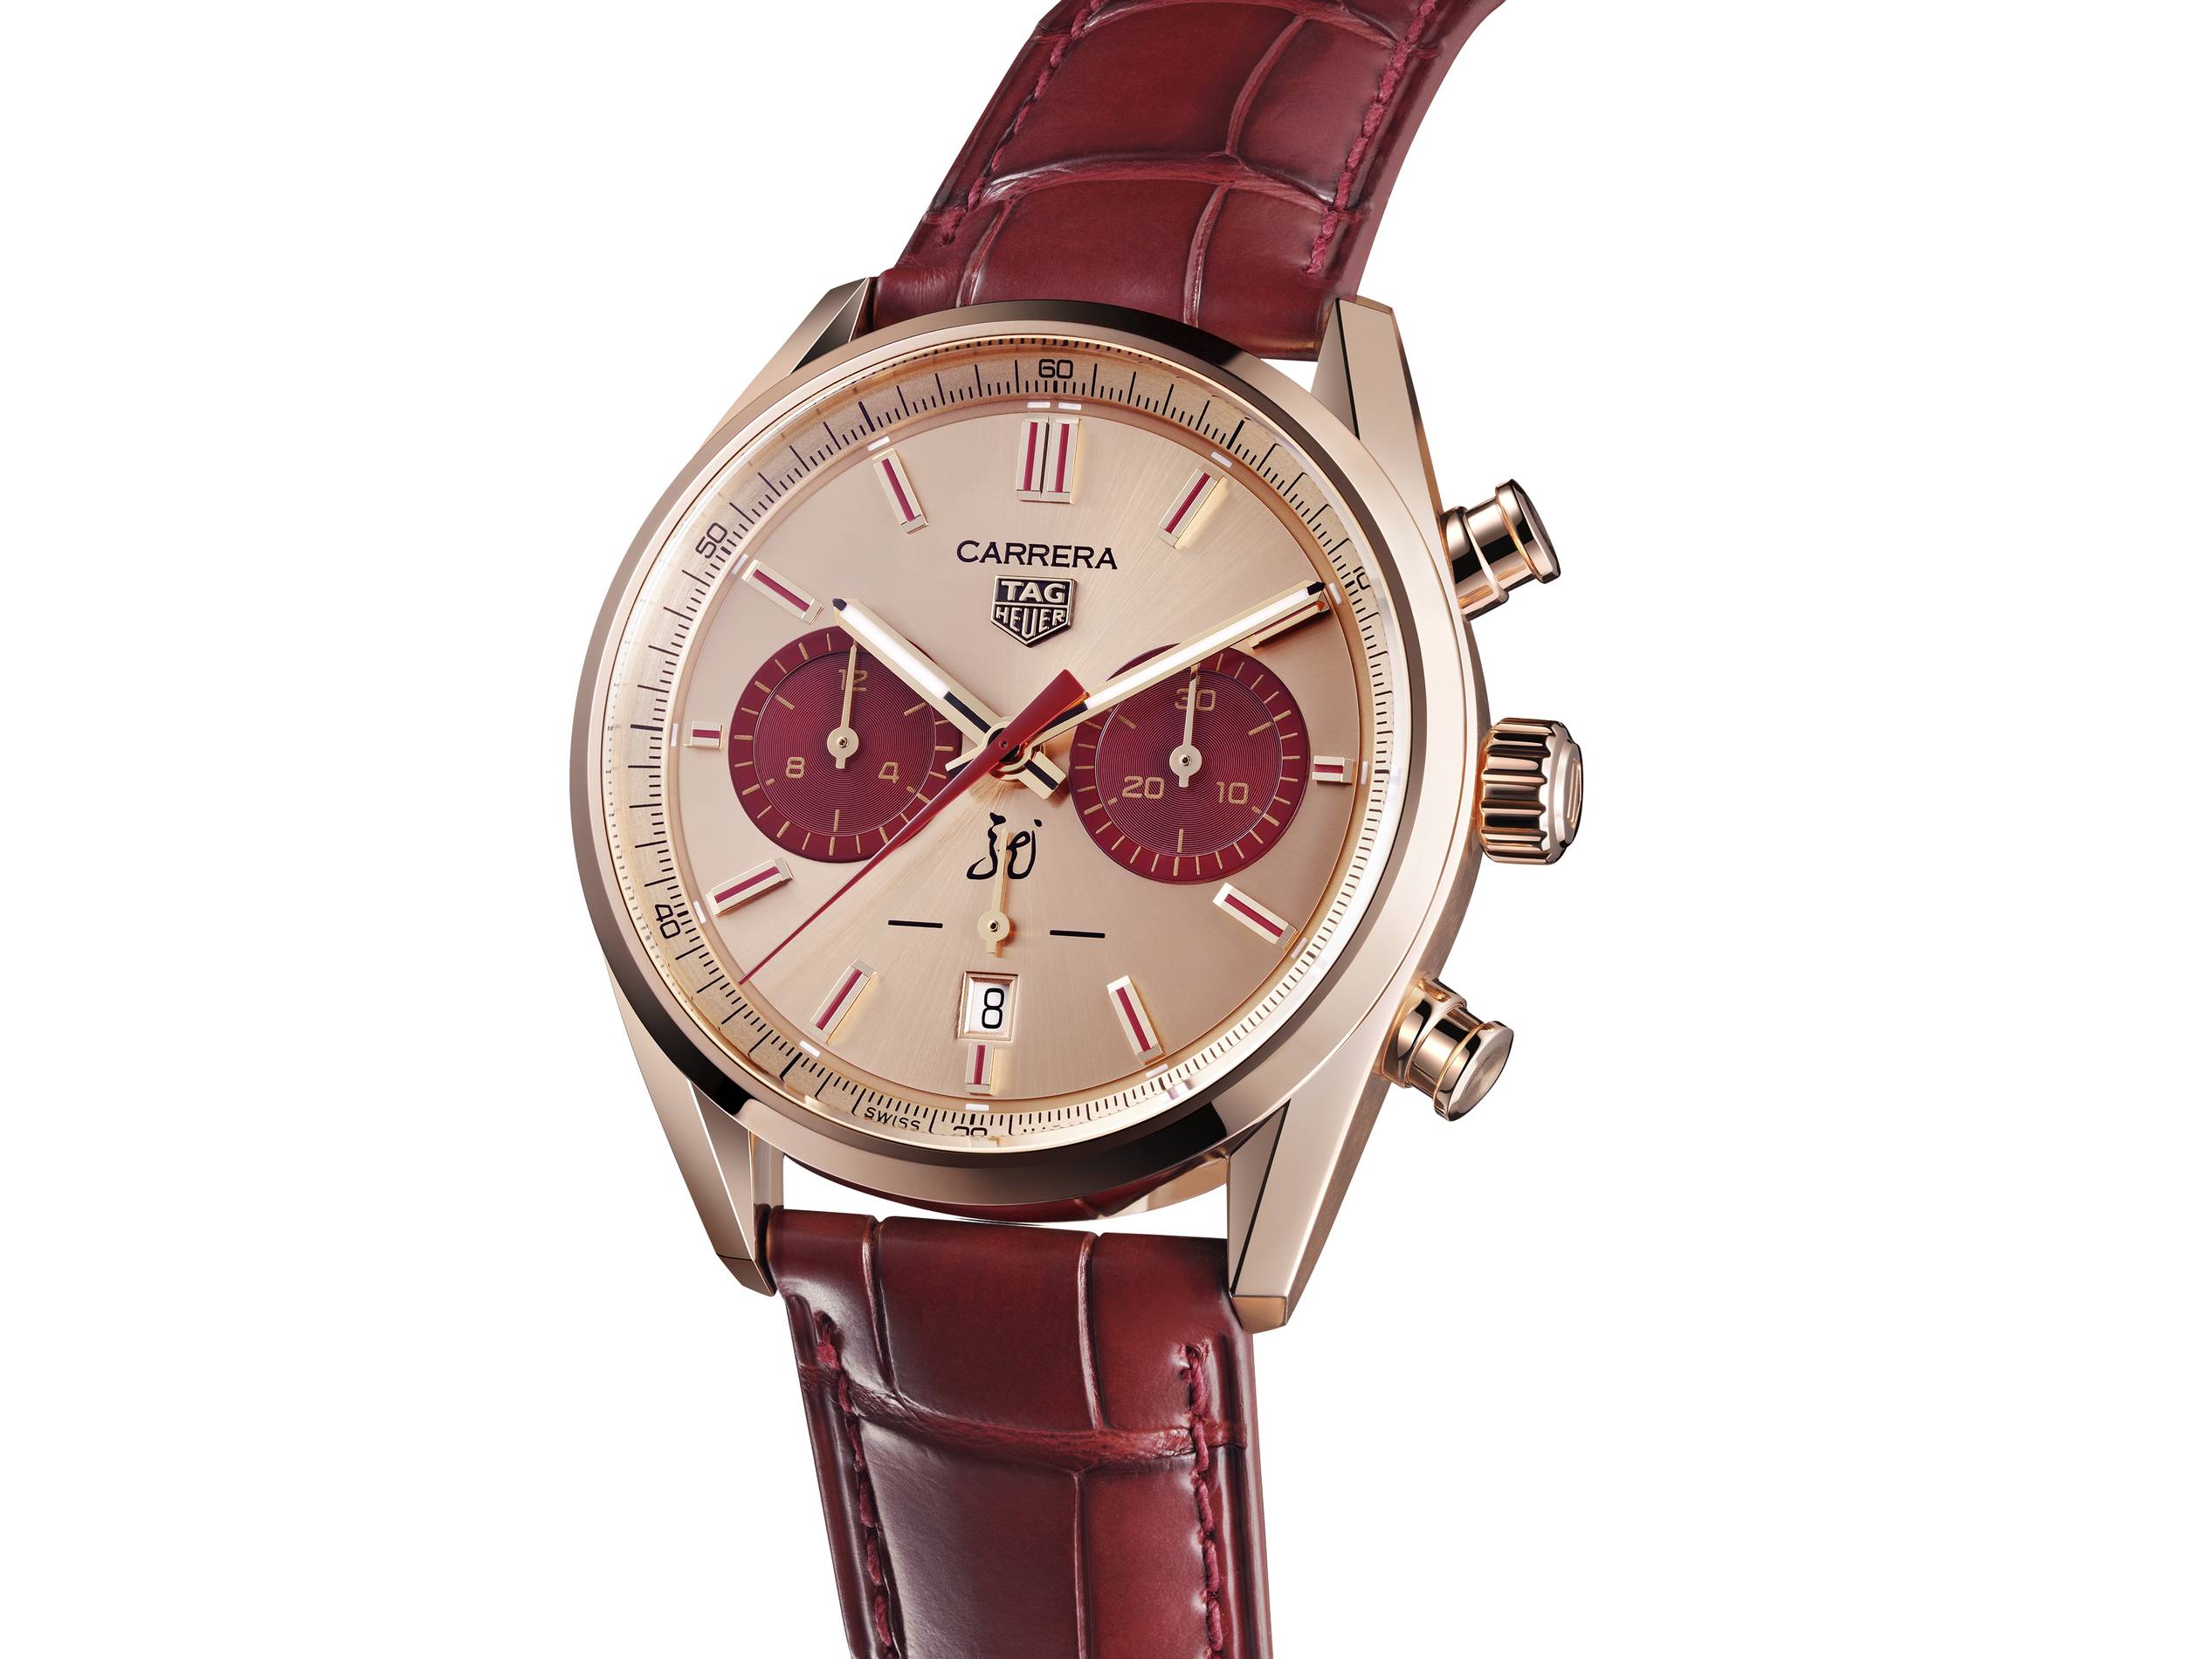 tag heuer carrera chronograph, limited edition year of the dragon timepiece